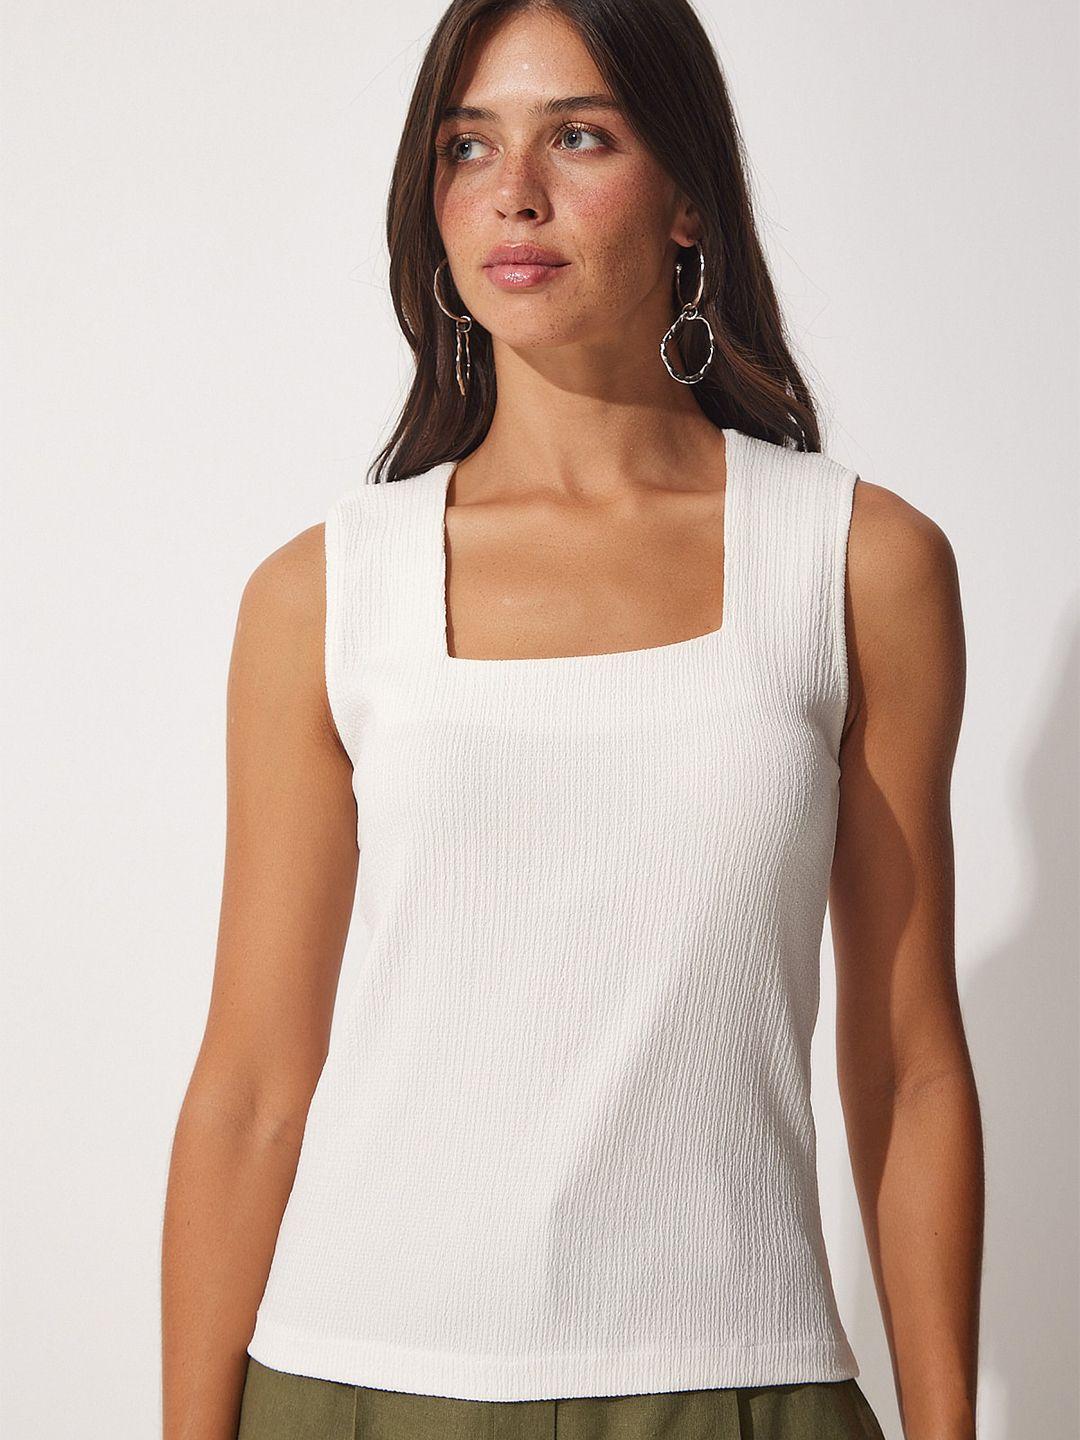 happiness istanbul square neck sleeveless top